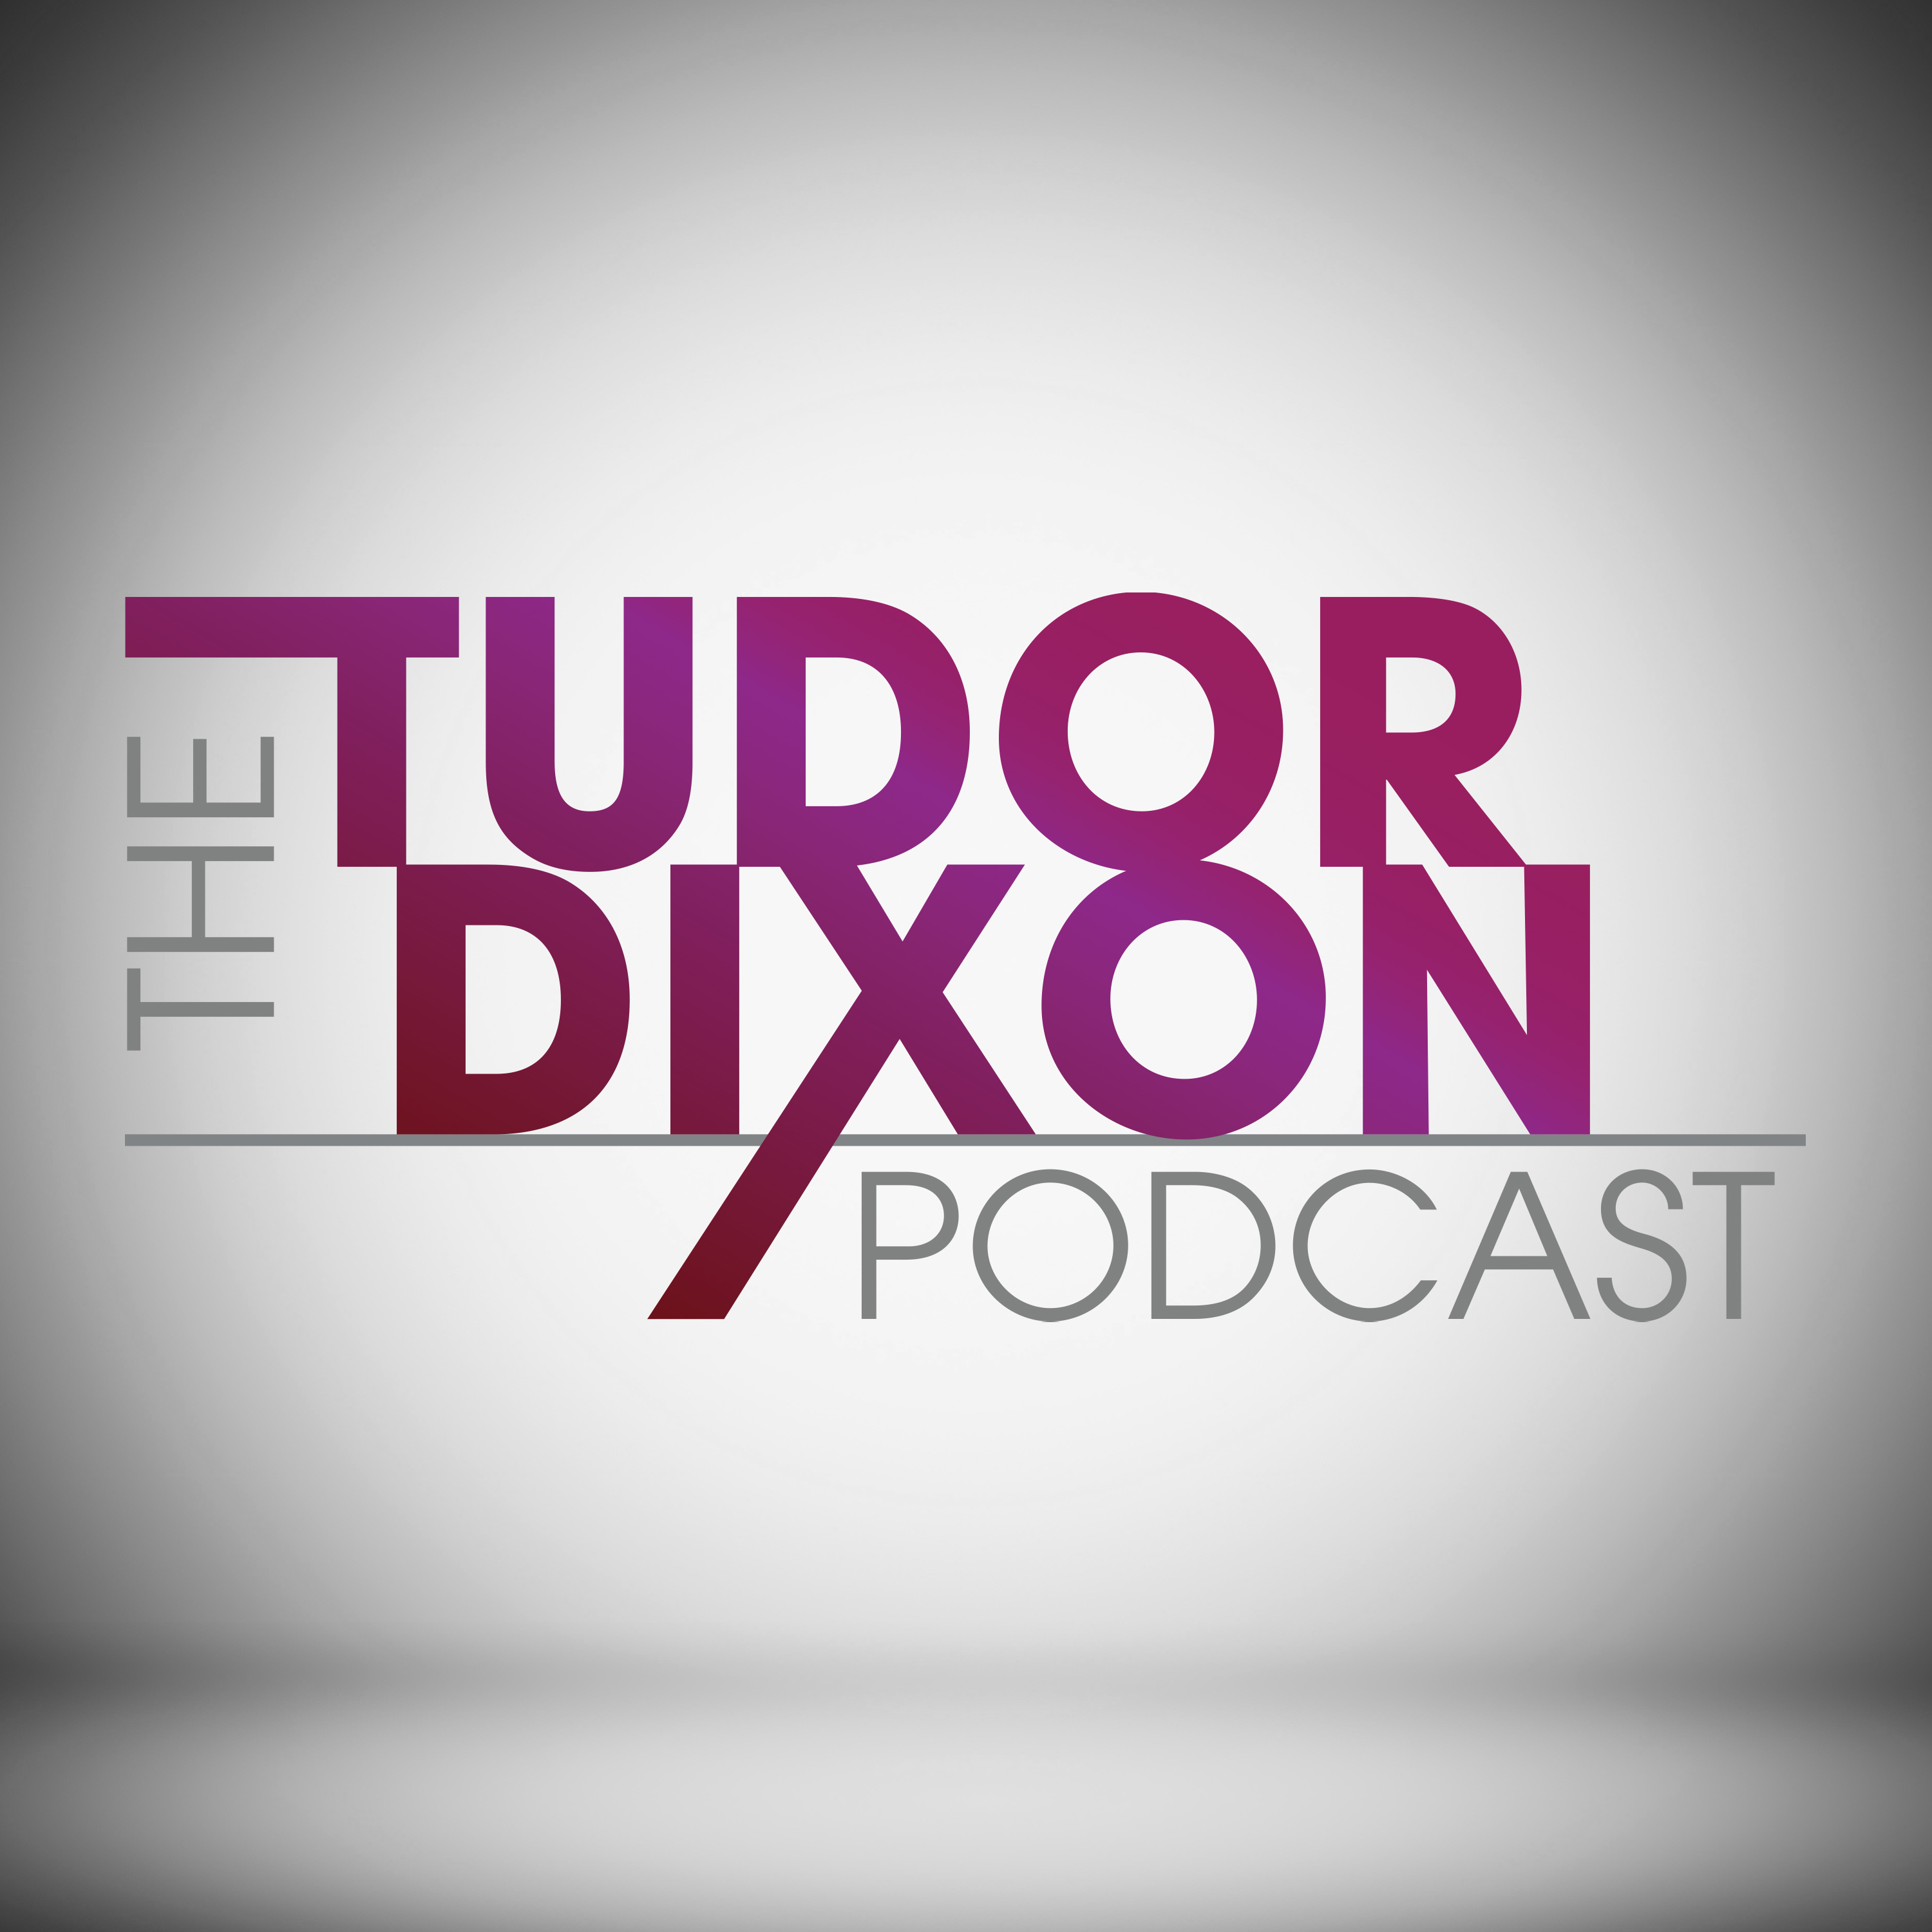 The Tudor Dixon Podcast: Lawn Care with a Higher Purpose with Rodney Smith Jr.